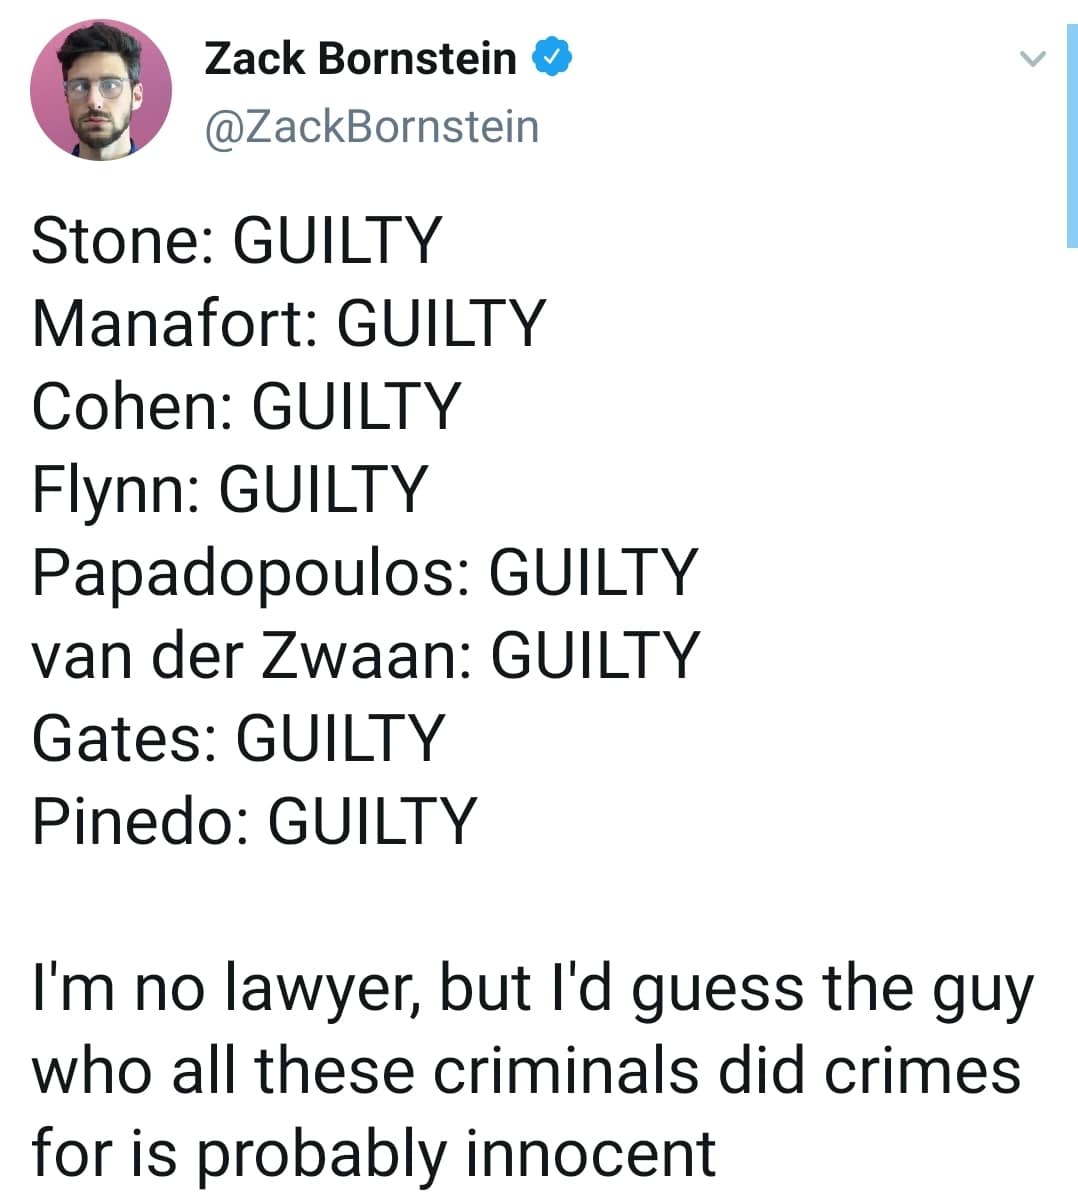 political political-memes political text: (9 Zack Bornstein @ZackBornstein Stone: GUILTY Manafort: GUILTY Cohen: GUILTY Flynn: GUILTY Papadopoulos: GUILTY van der Zwaan: GUILTY Gates: GUILTY Pinedo: GUILTY I'm no lawyer, but I'd guess the guy who all these criminals did crimes for is probably innocent 